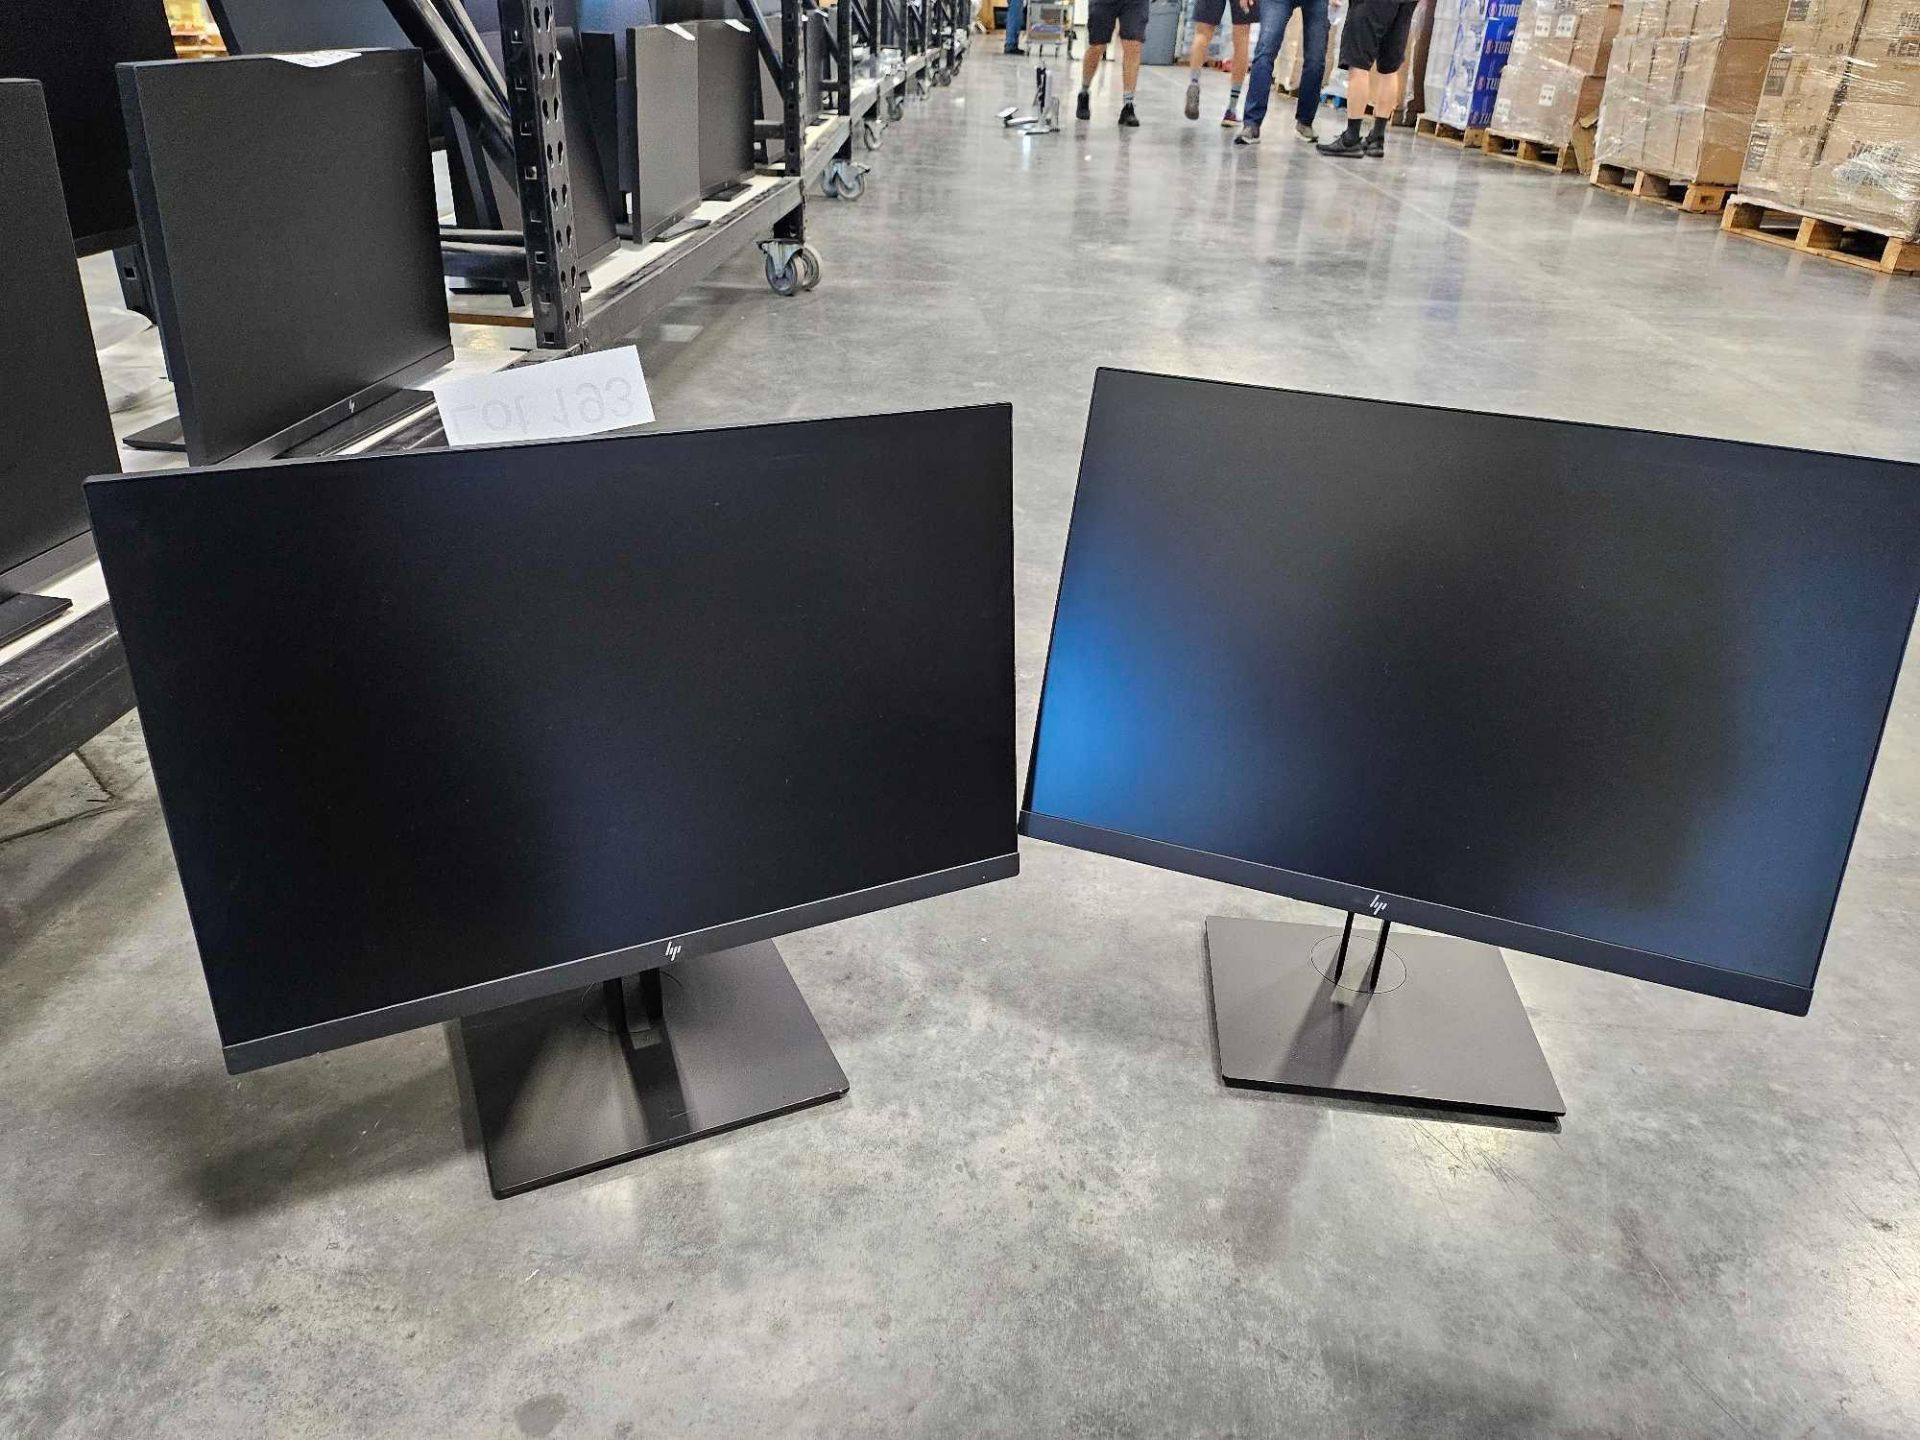 (2) HP z24" monitors with stands